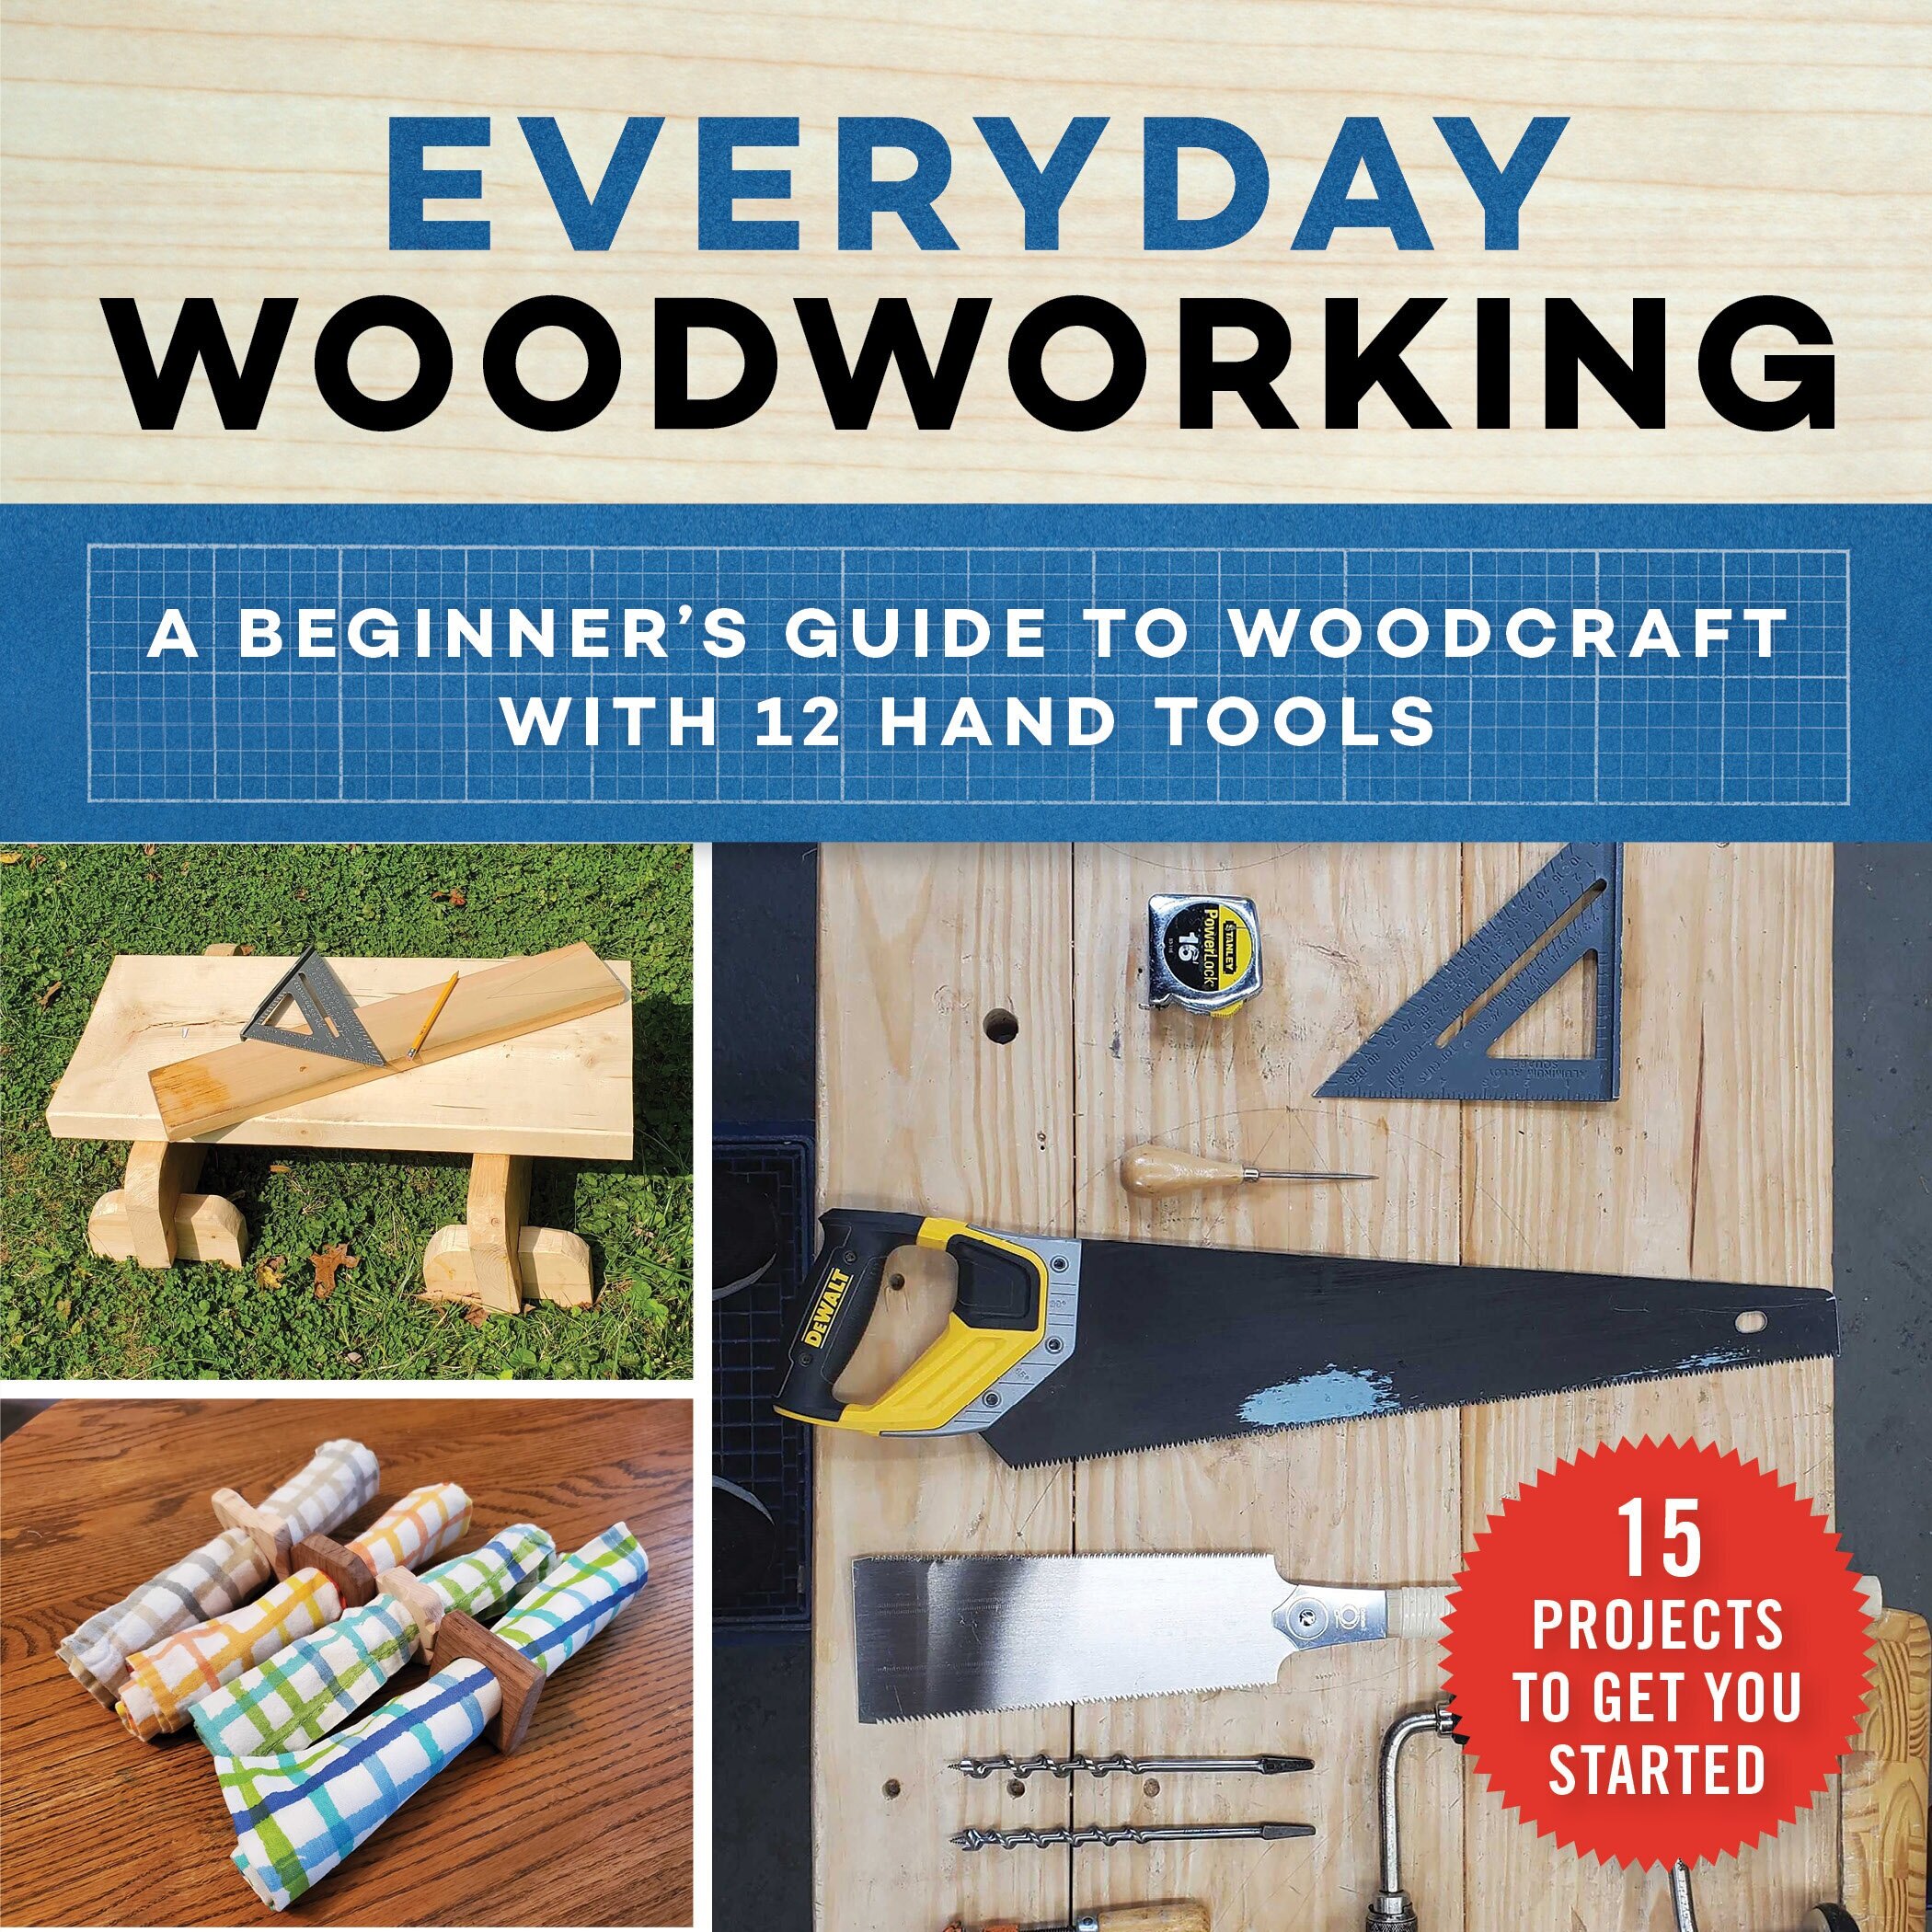 Had anyone used these before? : r/woodworking